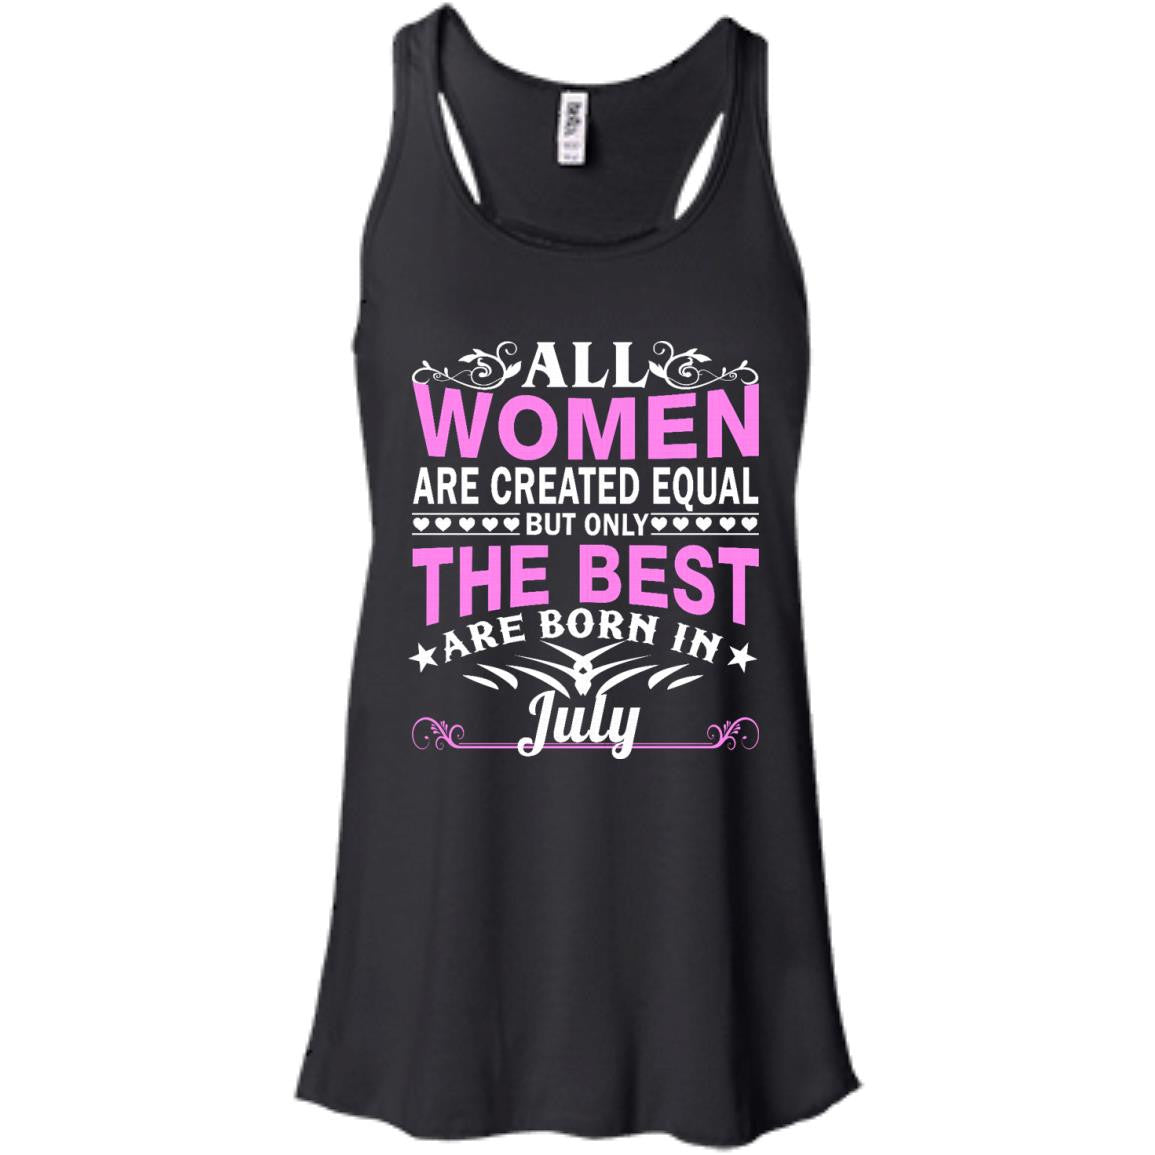 All Women Are Created Equal But Only The Best Are Born In July shirt,